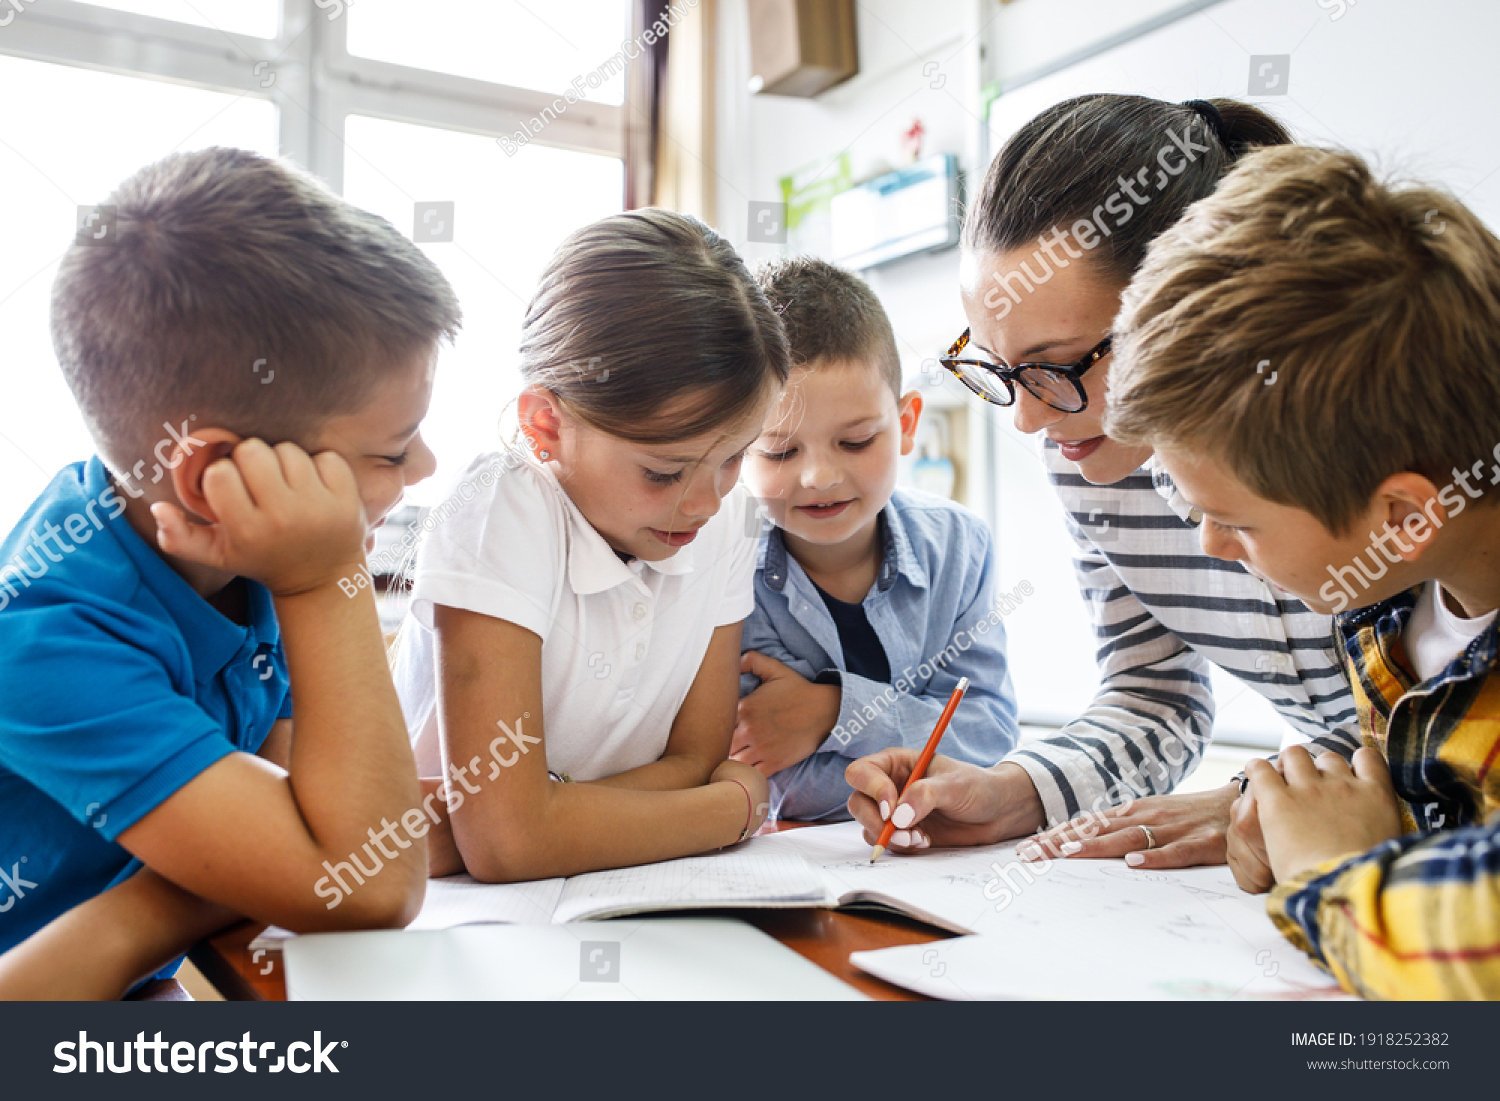 Female teacher helps school kids to finish they lesson.They sitting all together at one desk.	
 #1918252382